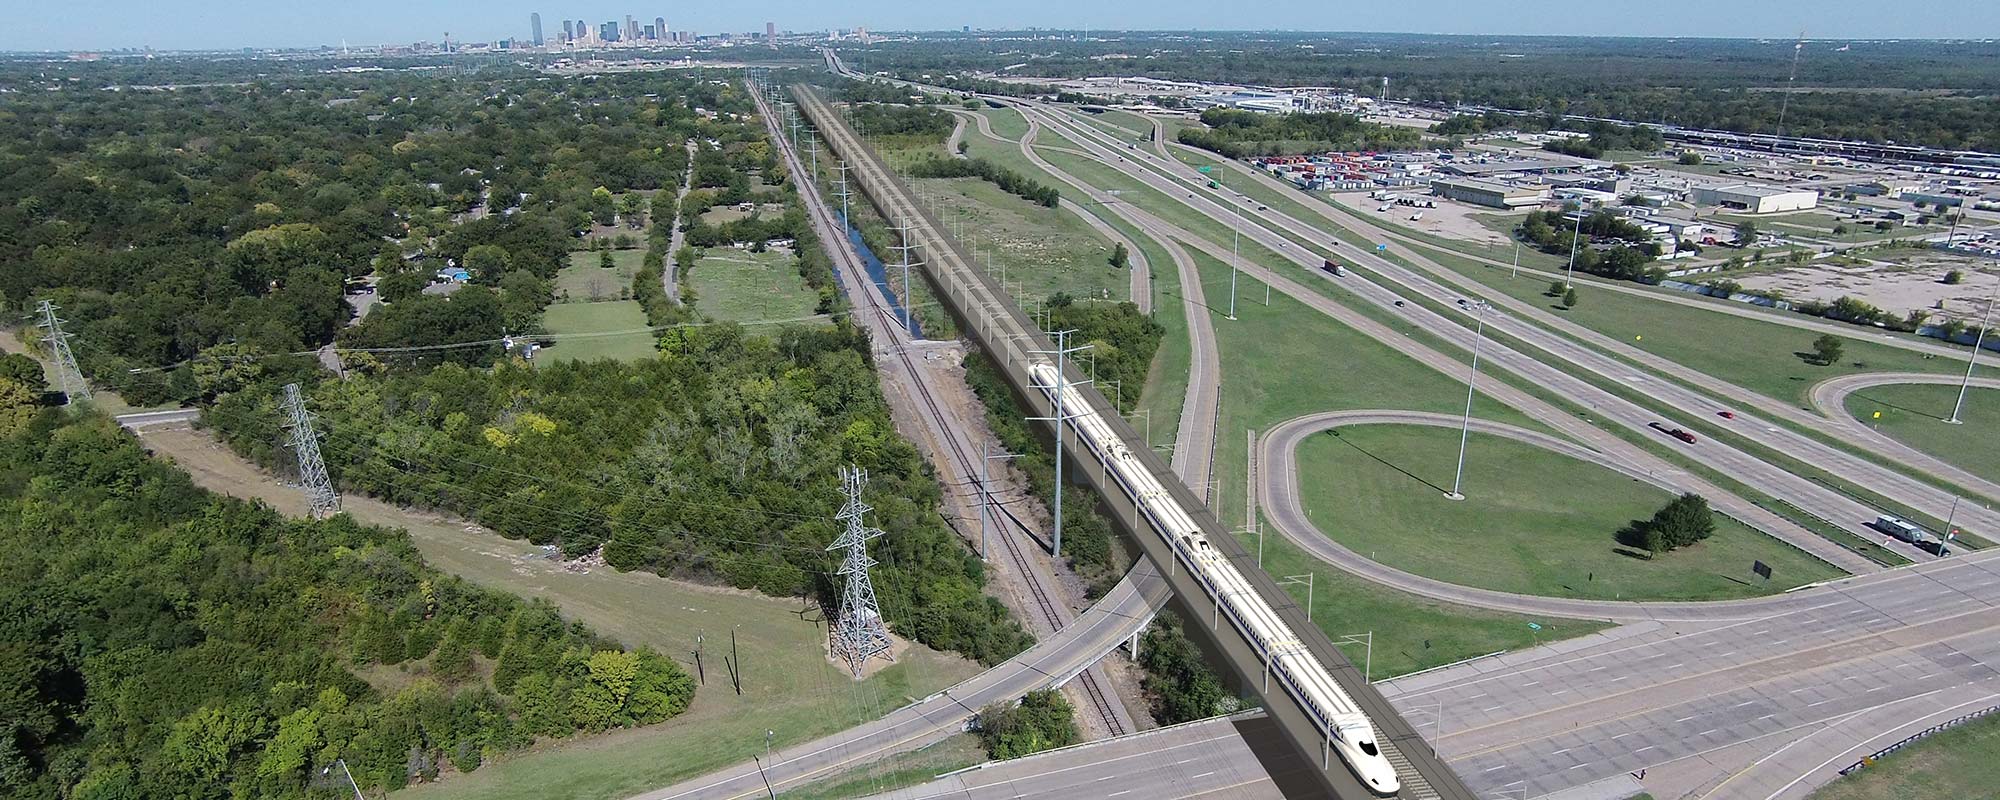 Rendering of Texas Central High-Speed Rail Road 